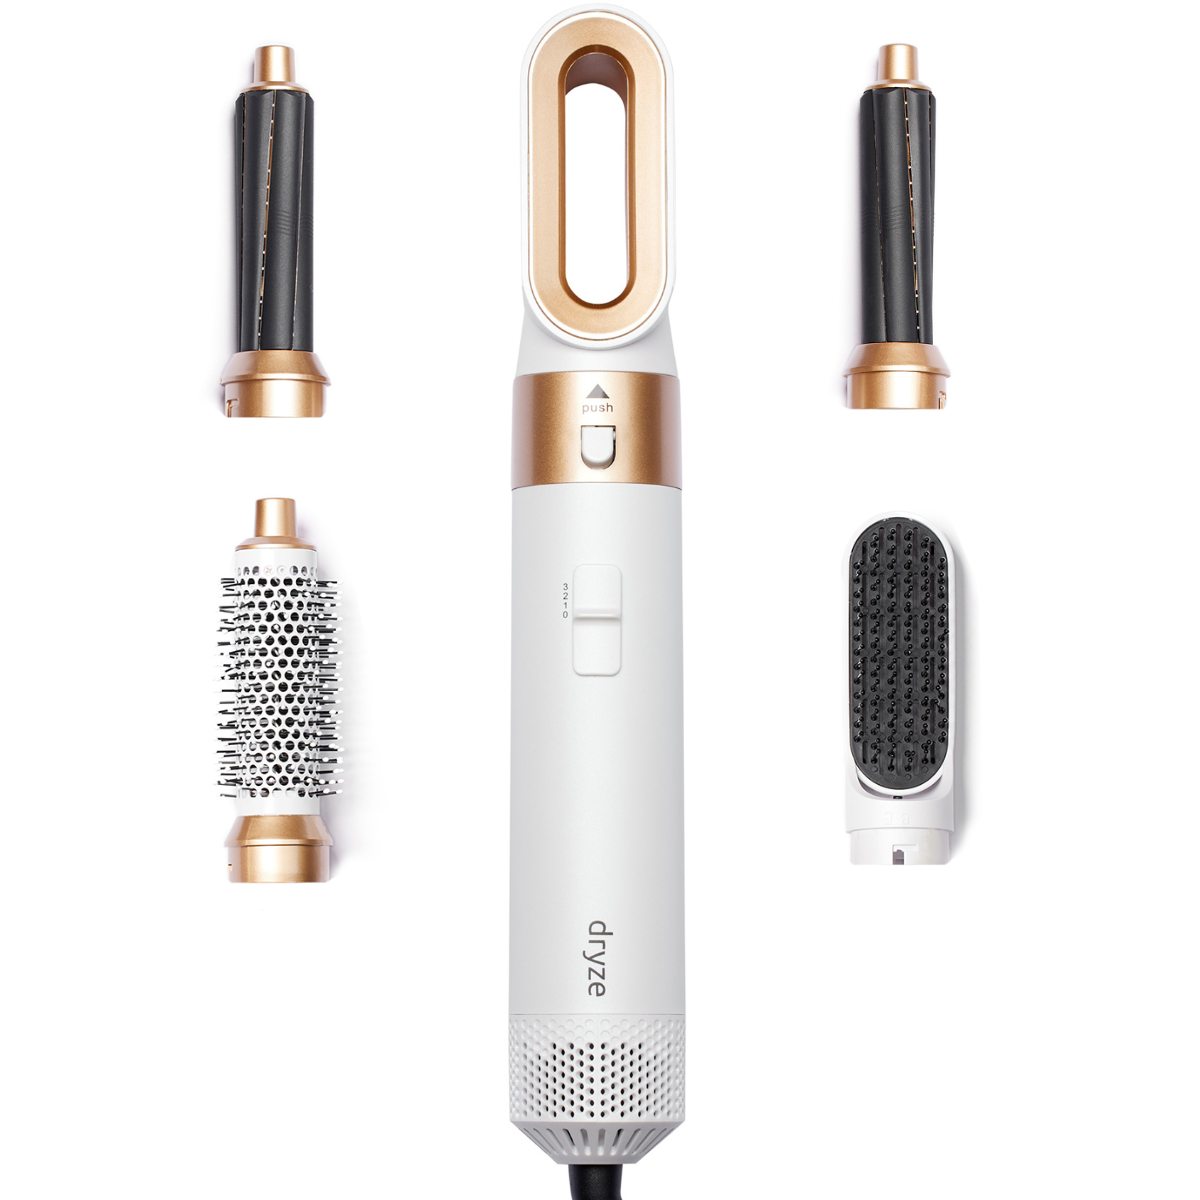 Dryze airstyler cream white/gold edition - Including leather storage case